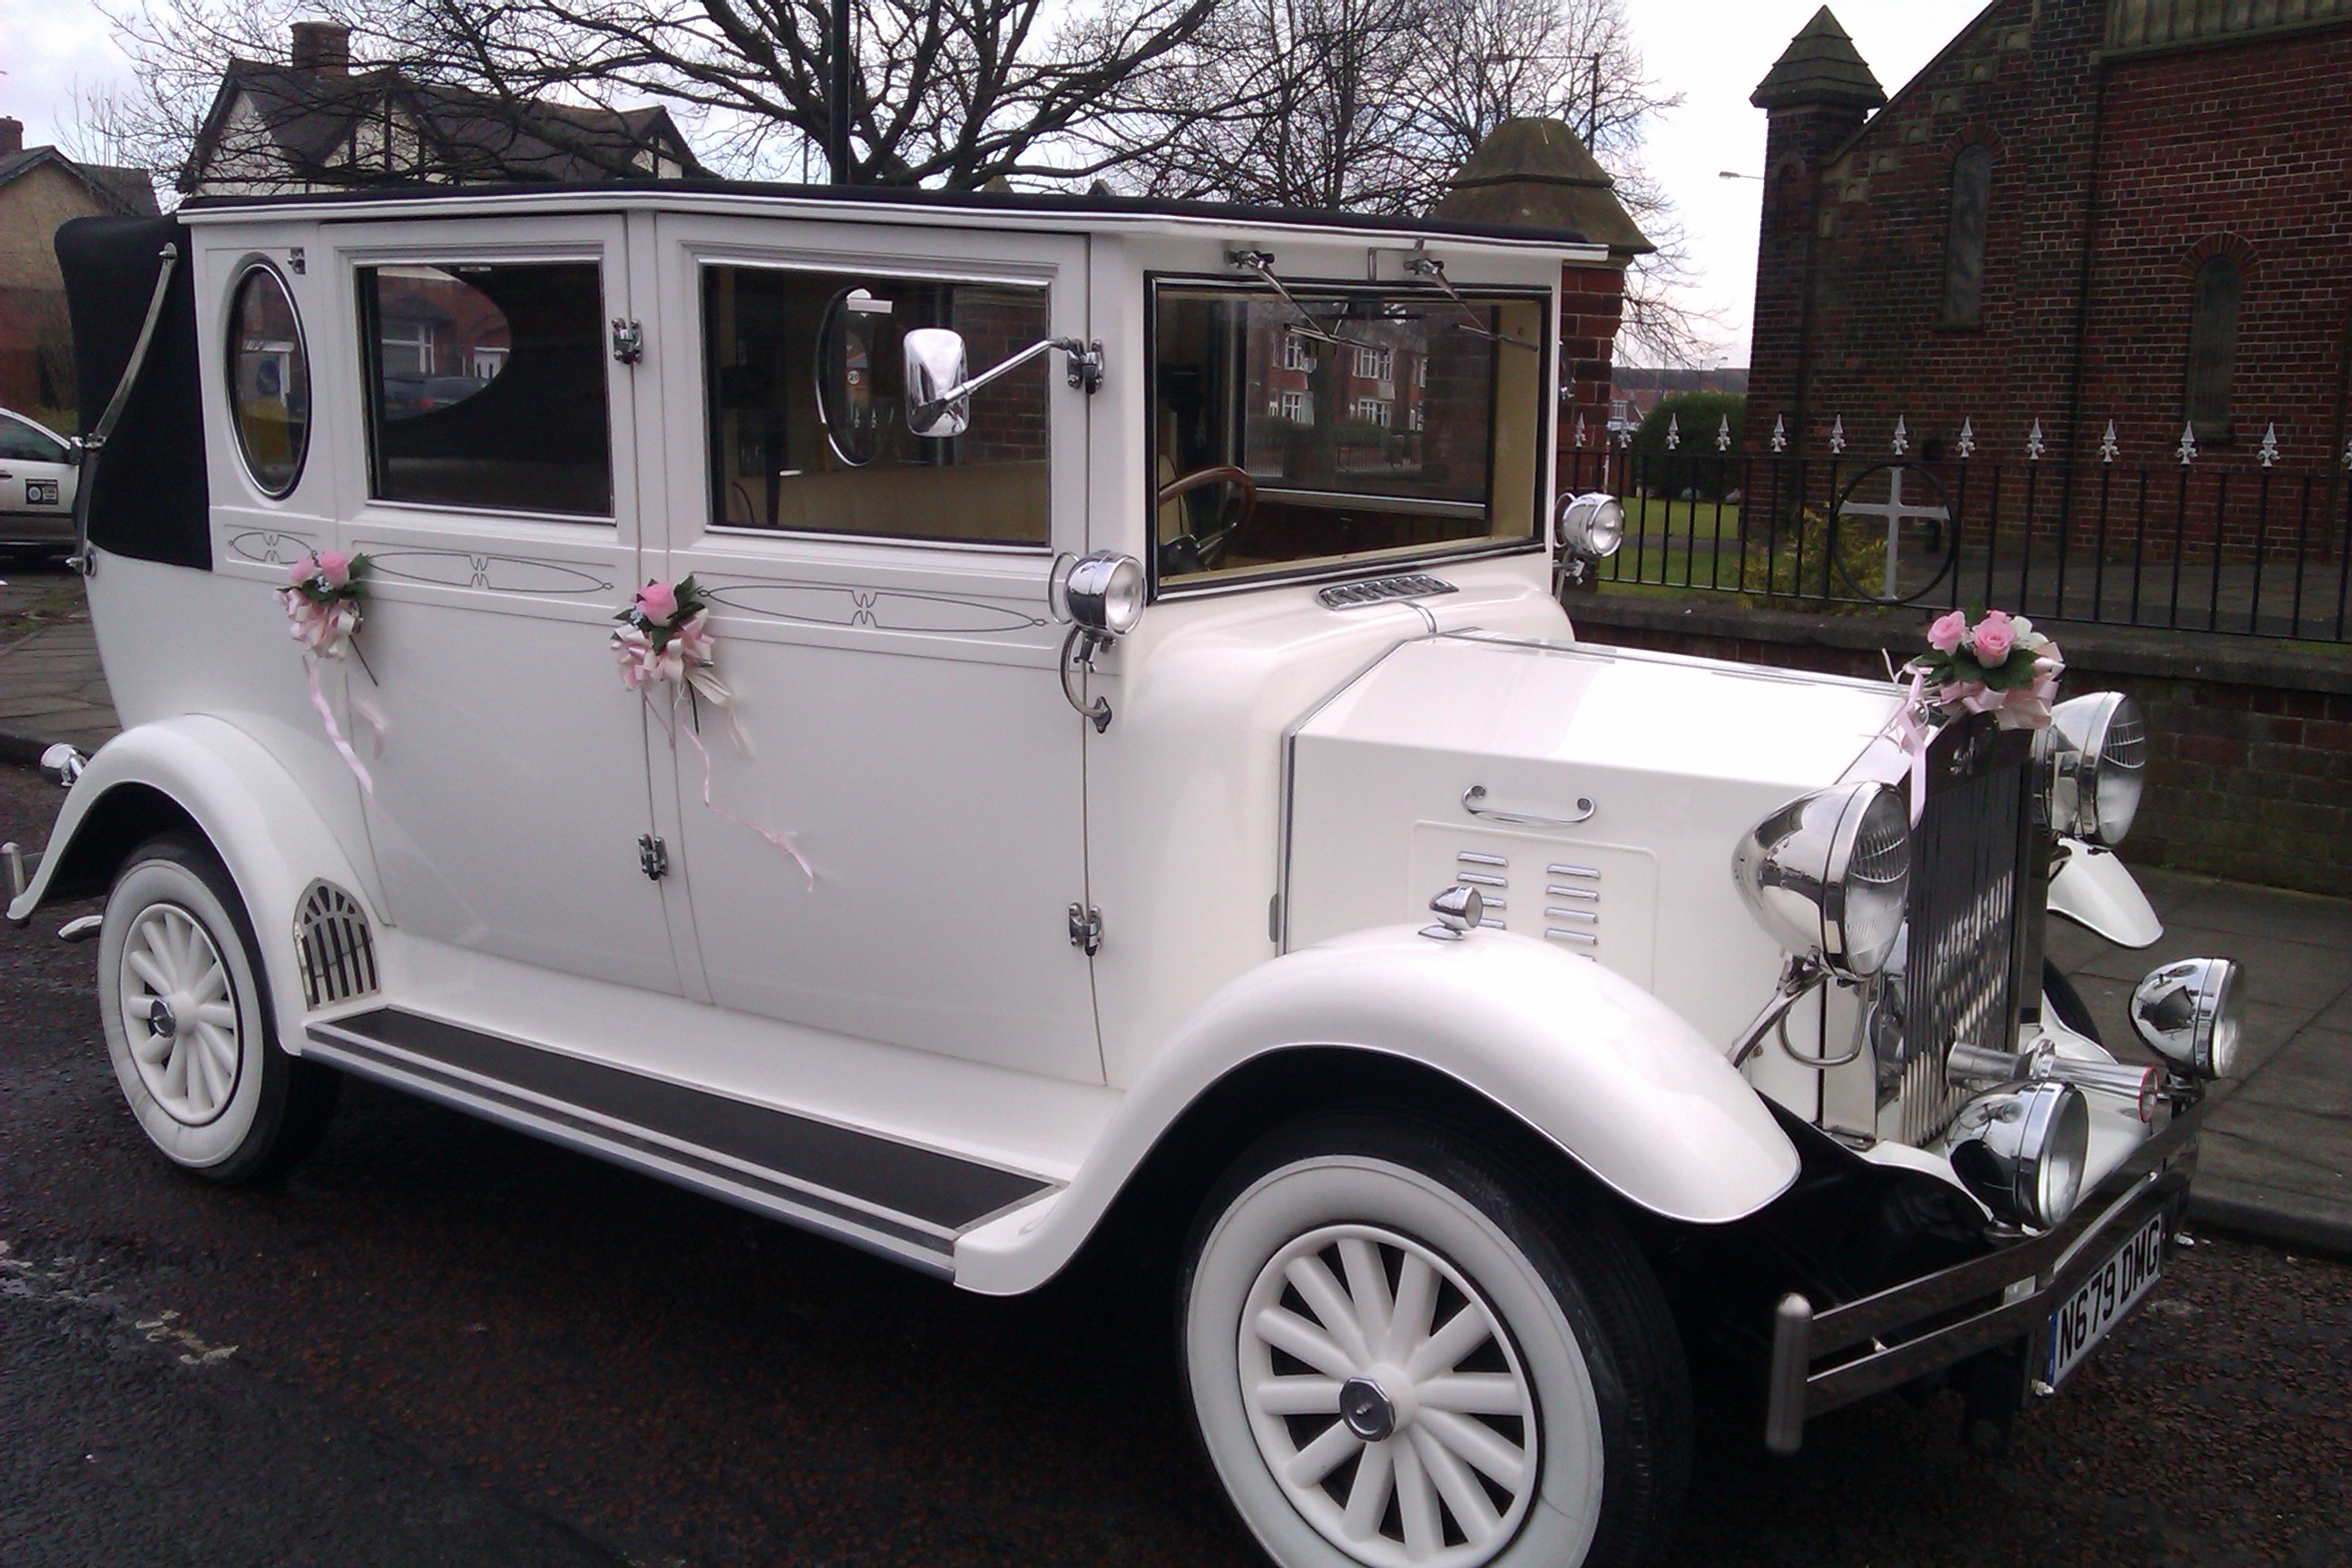 Vintage wedding car hire Middlesbrough, Stockton, Hartlepool, Darlington, Durham and the north east. Redcar and Whitby also covered.